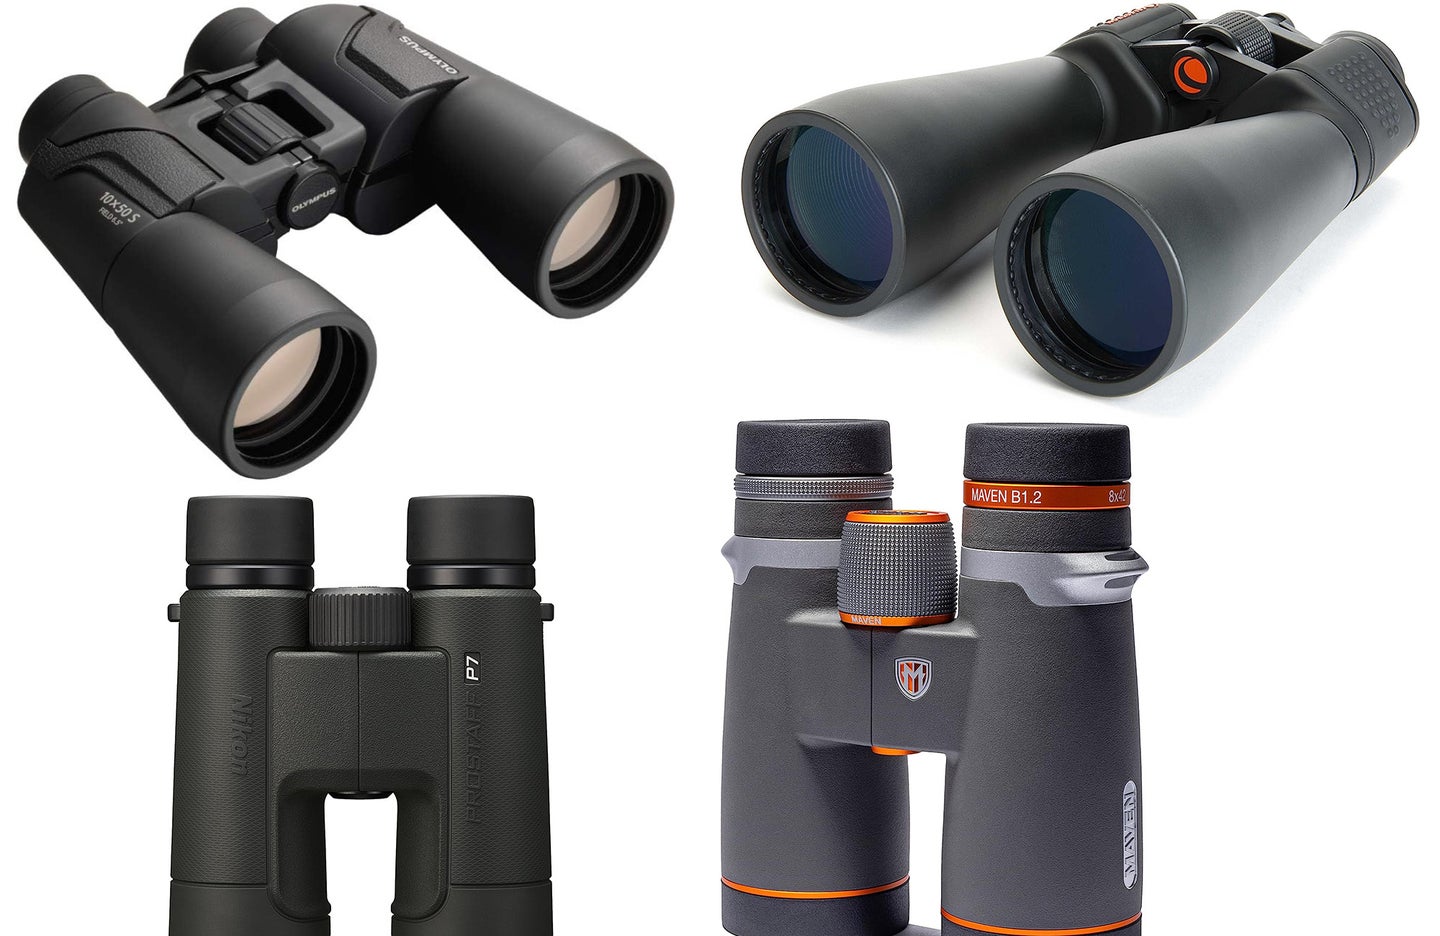 Get up close to eagles, owls, hawks, and more with the best bird watching binoculars.